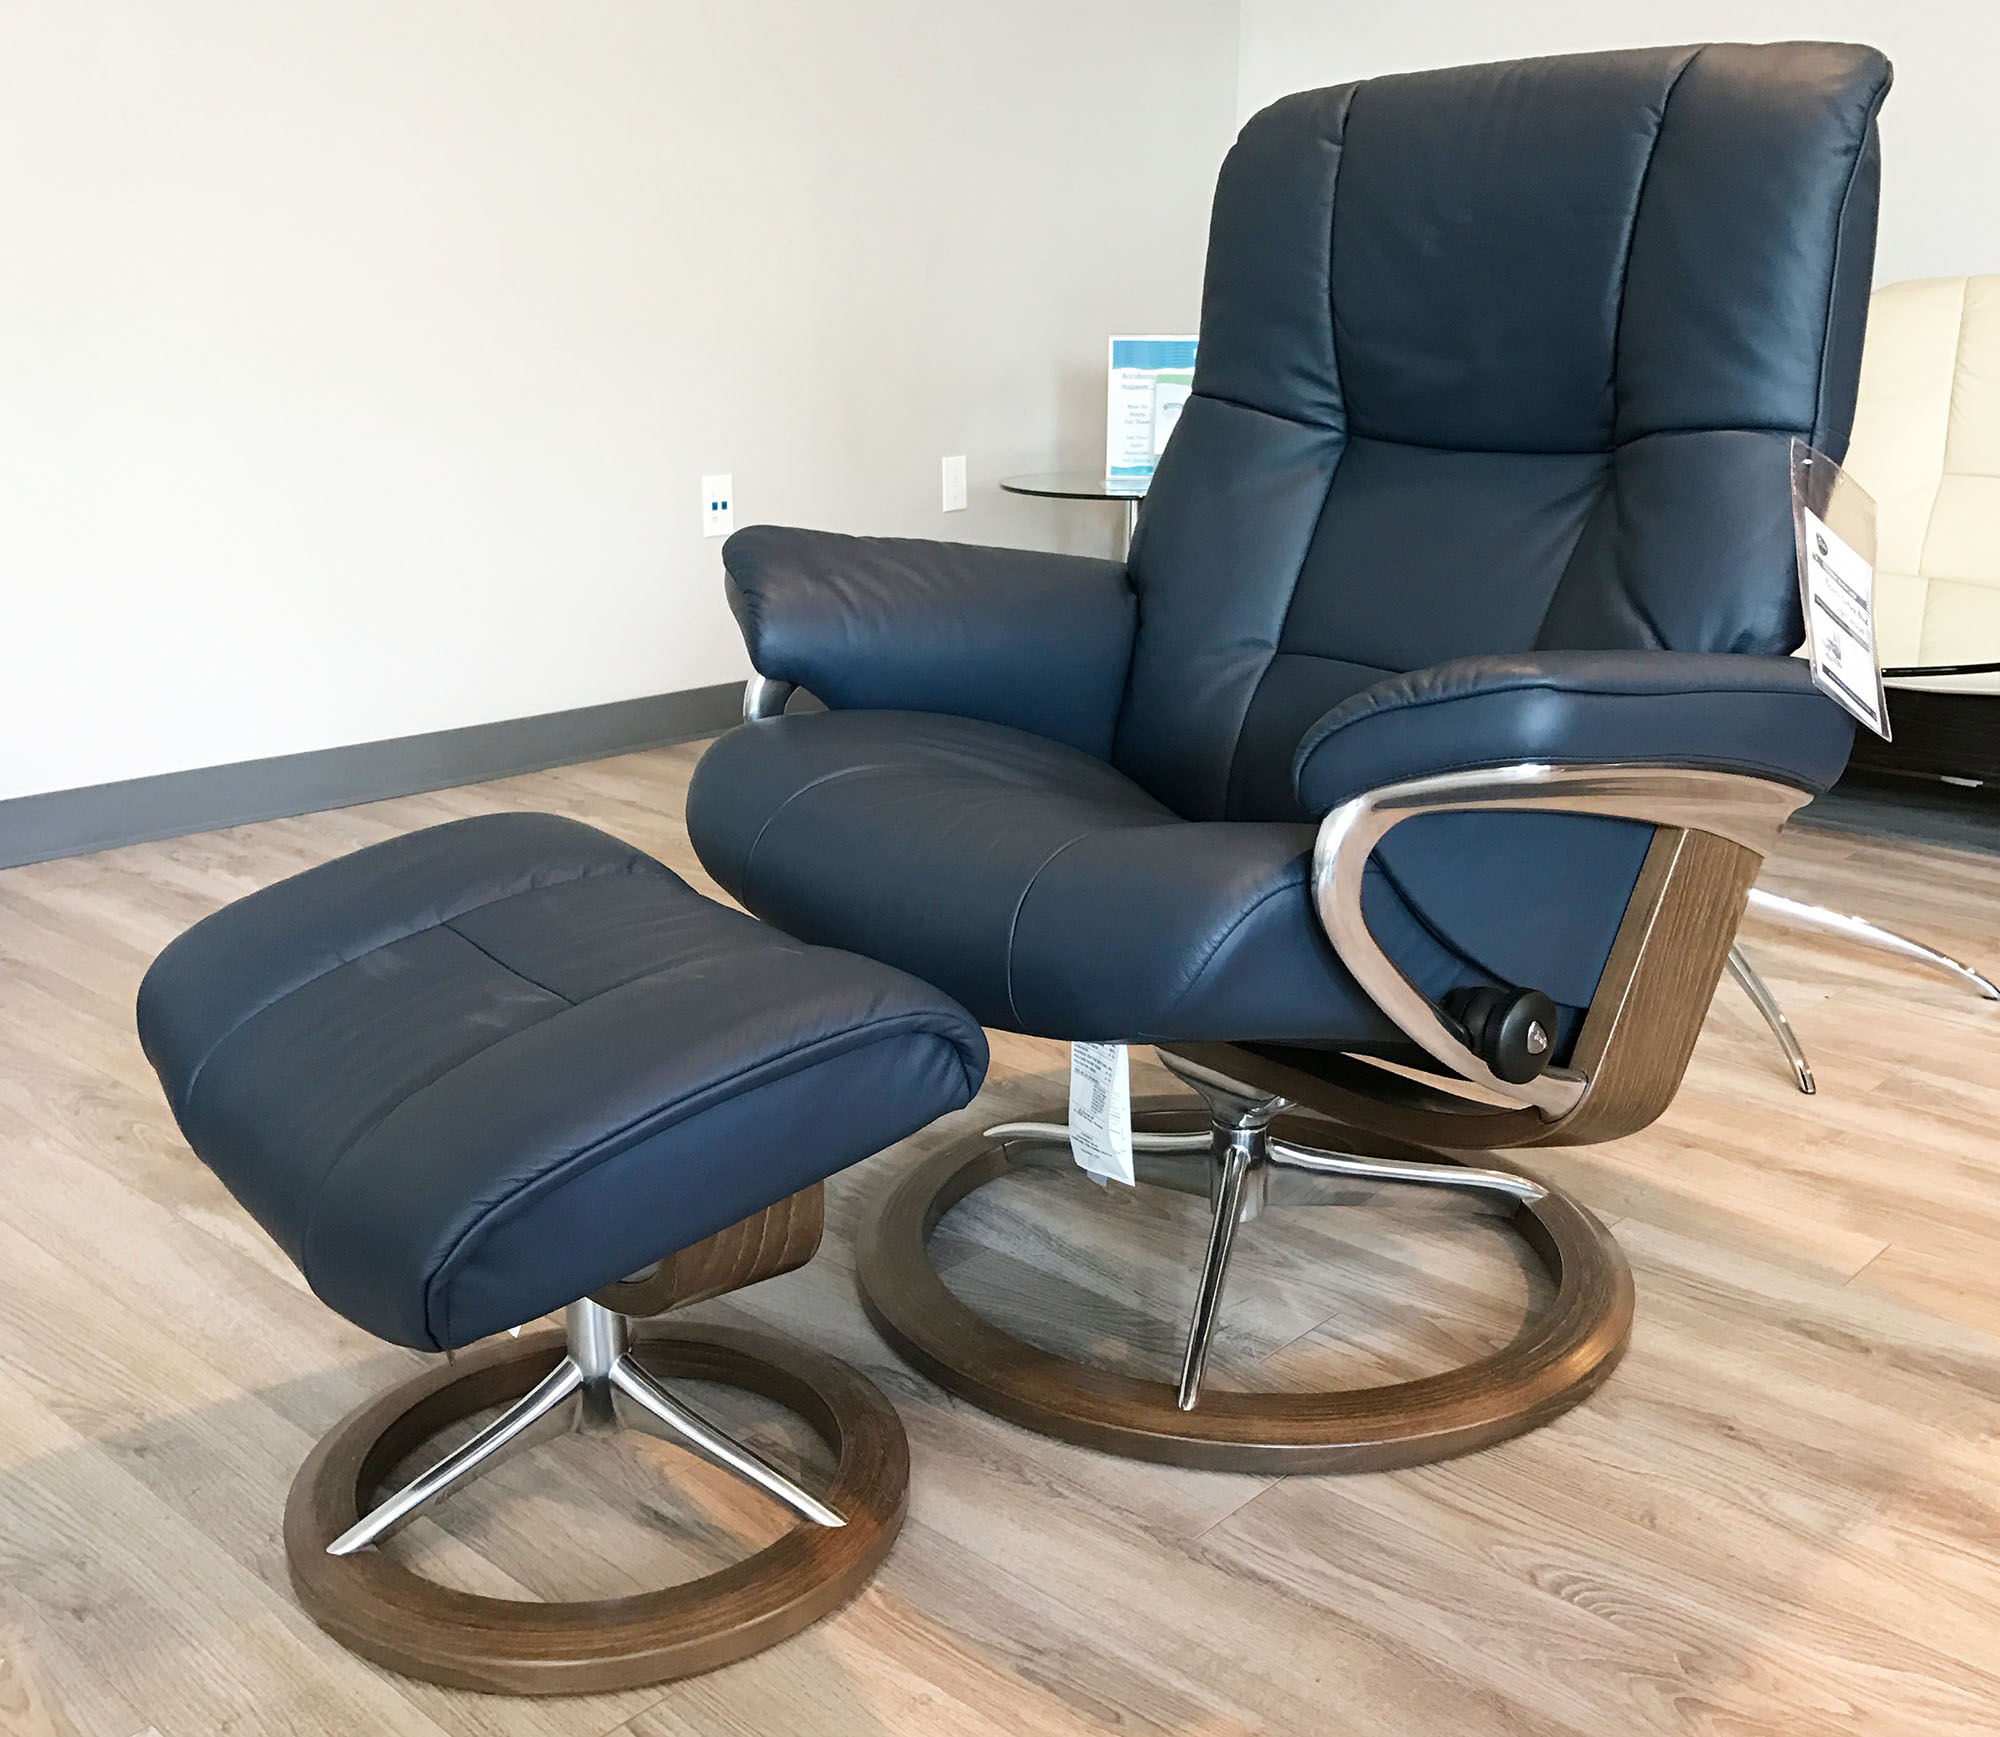 Blue Walnut Paloma Oxford Leather Mayfair Wood by Ottoman and Recliner Ekornes Signature Chair Stressless